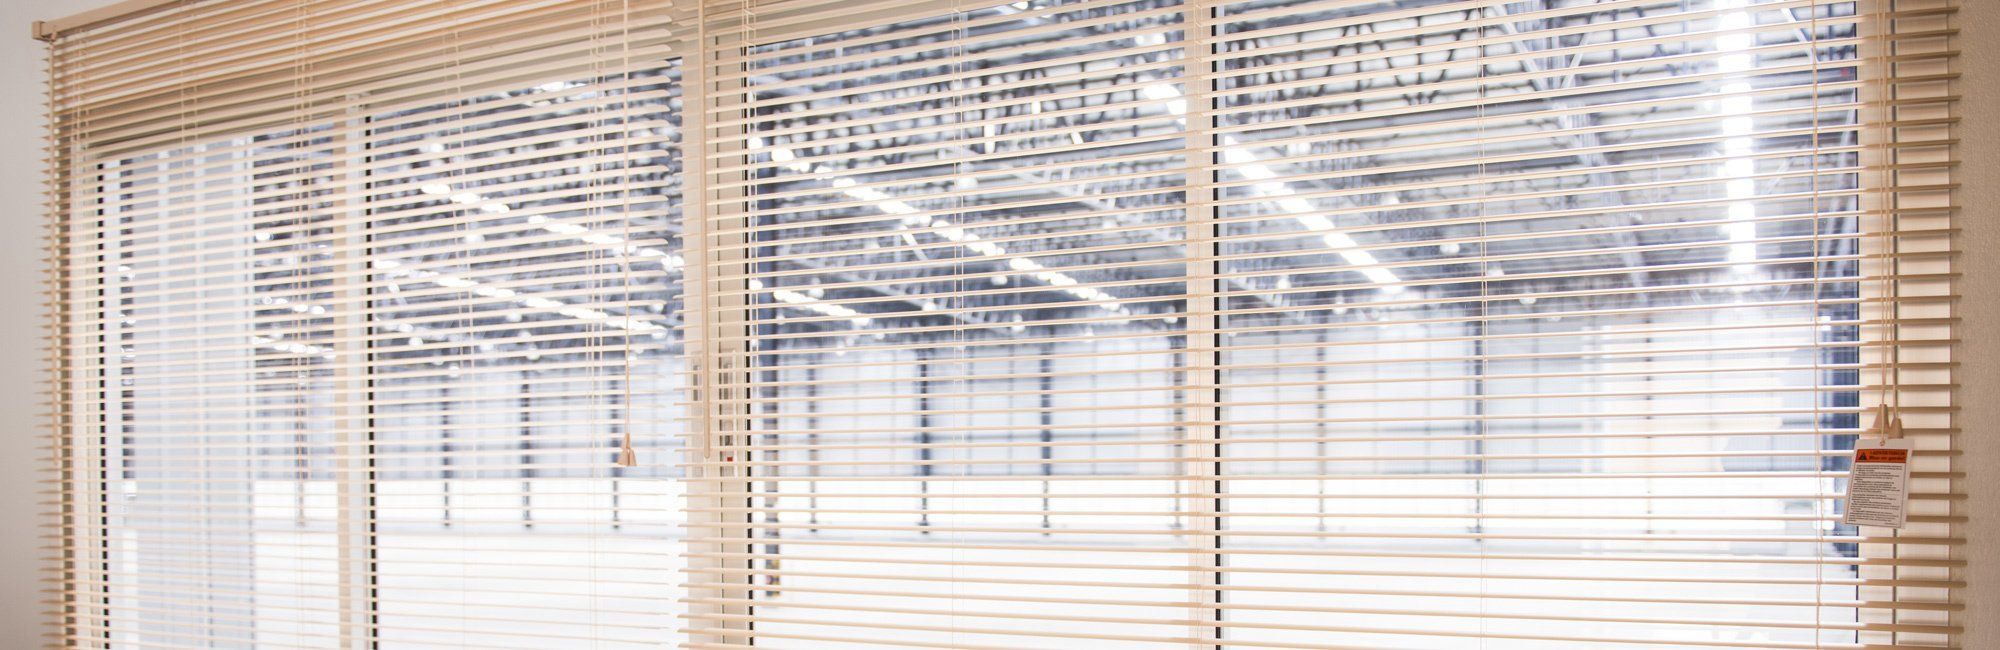 View of the blinds installed in the commercial building